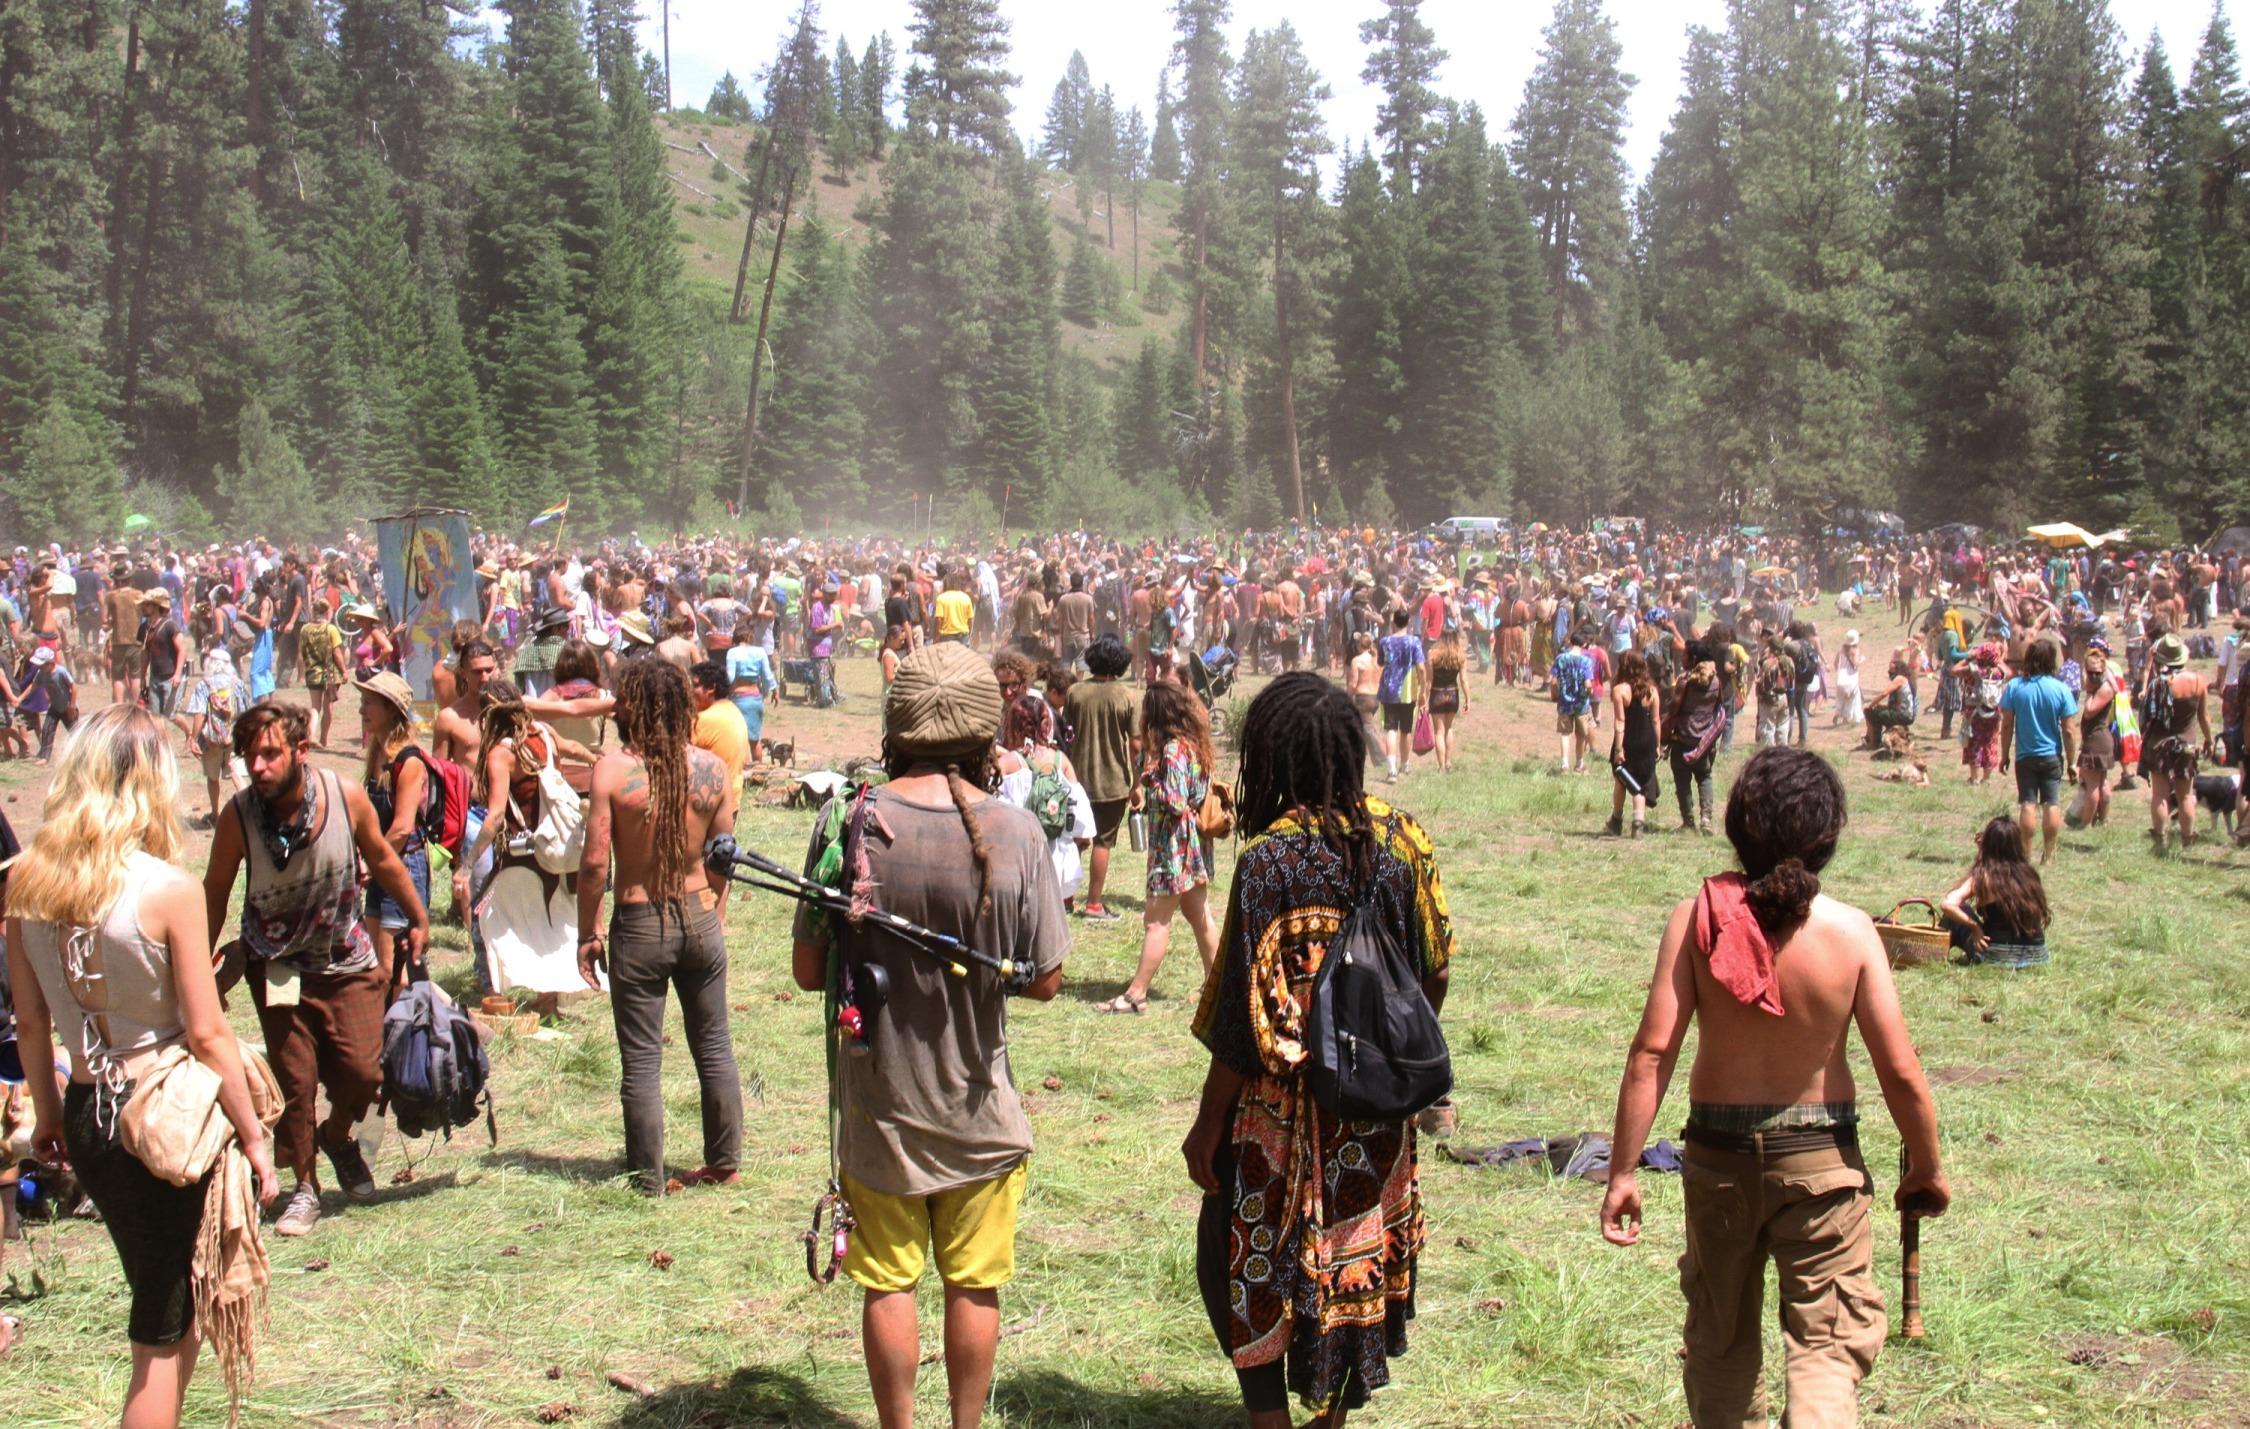 Oregon Rainbow Gathering Bliss For Campers, Headache For Forest